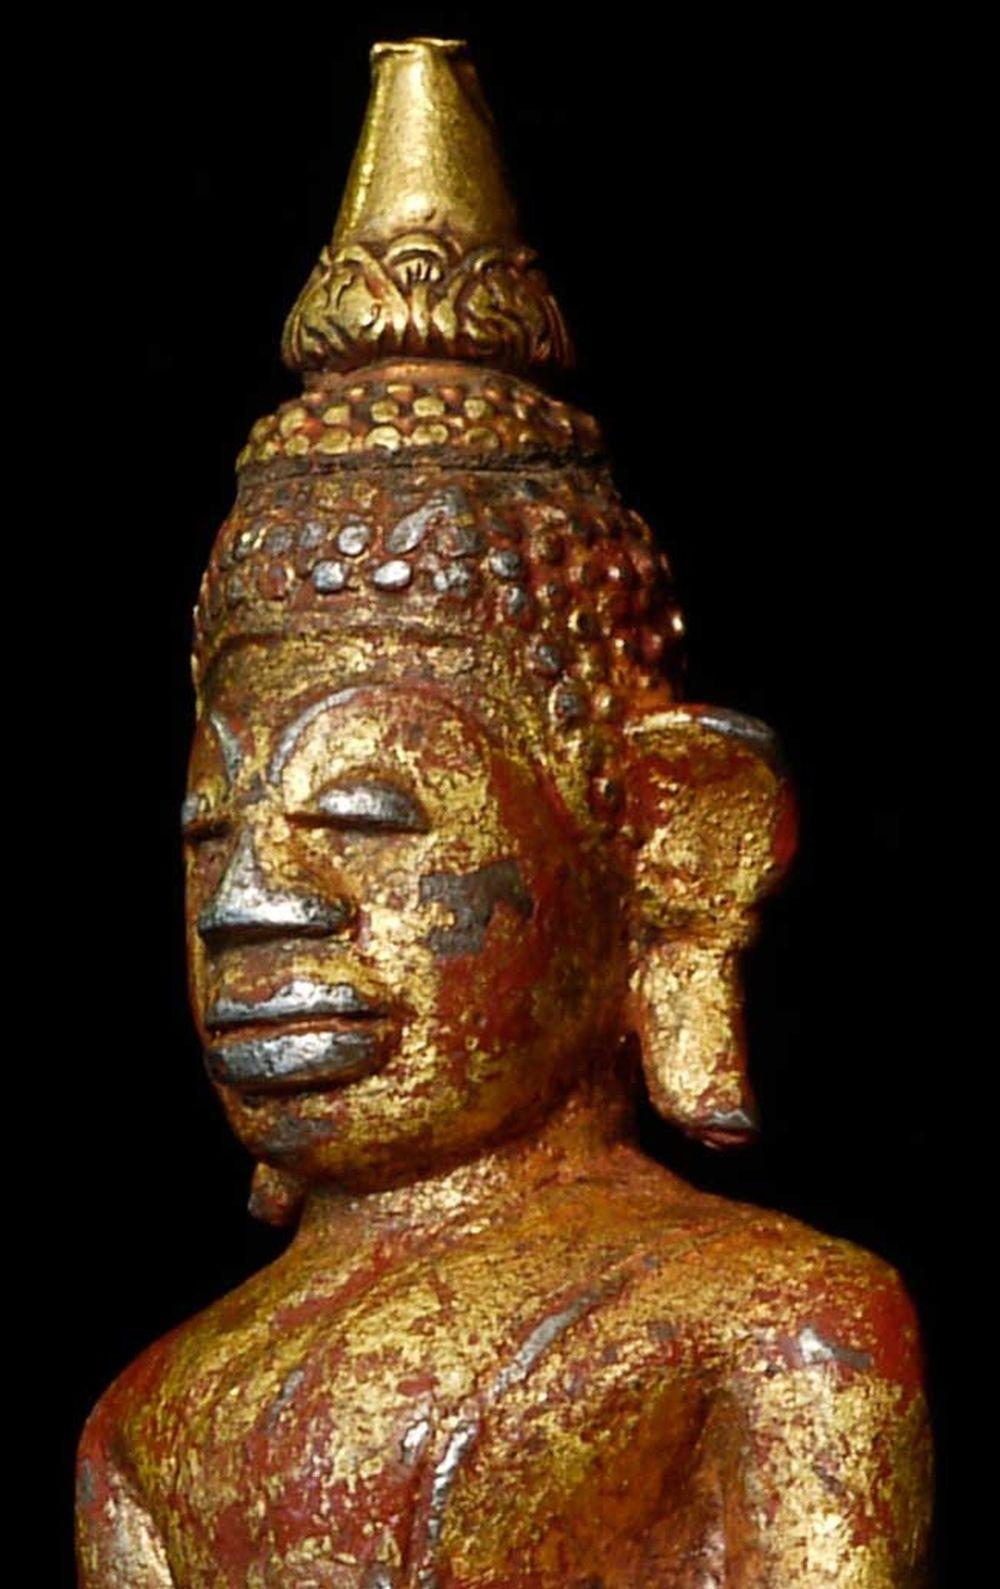 An extremely uncommon and very beautiful Cambodian Buddha. The body is made of nearly pure silver Buddha with a high-karat gold flame on the top of his head. Remains of lacquer and gilding are evident. Very beautiful face- with a profound serenity